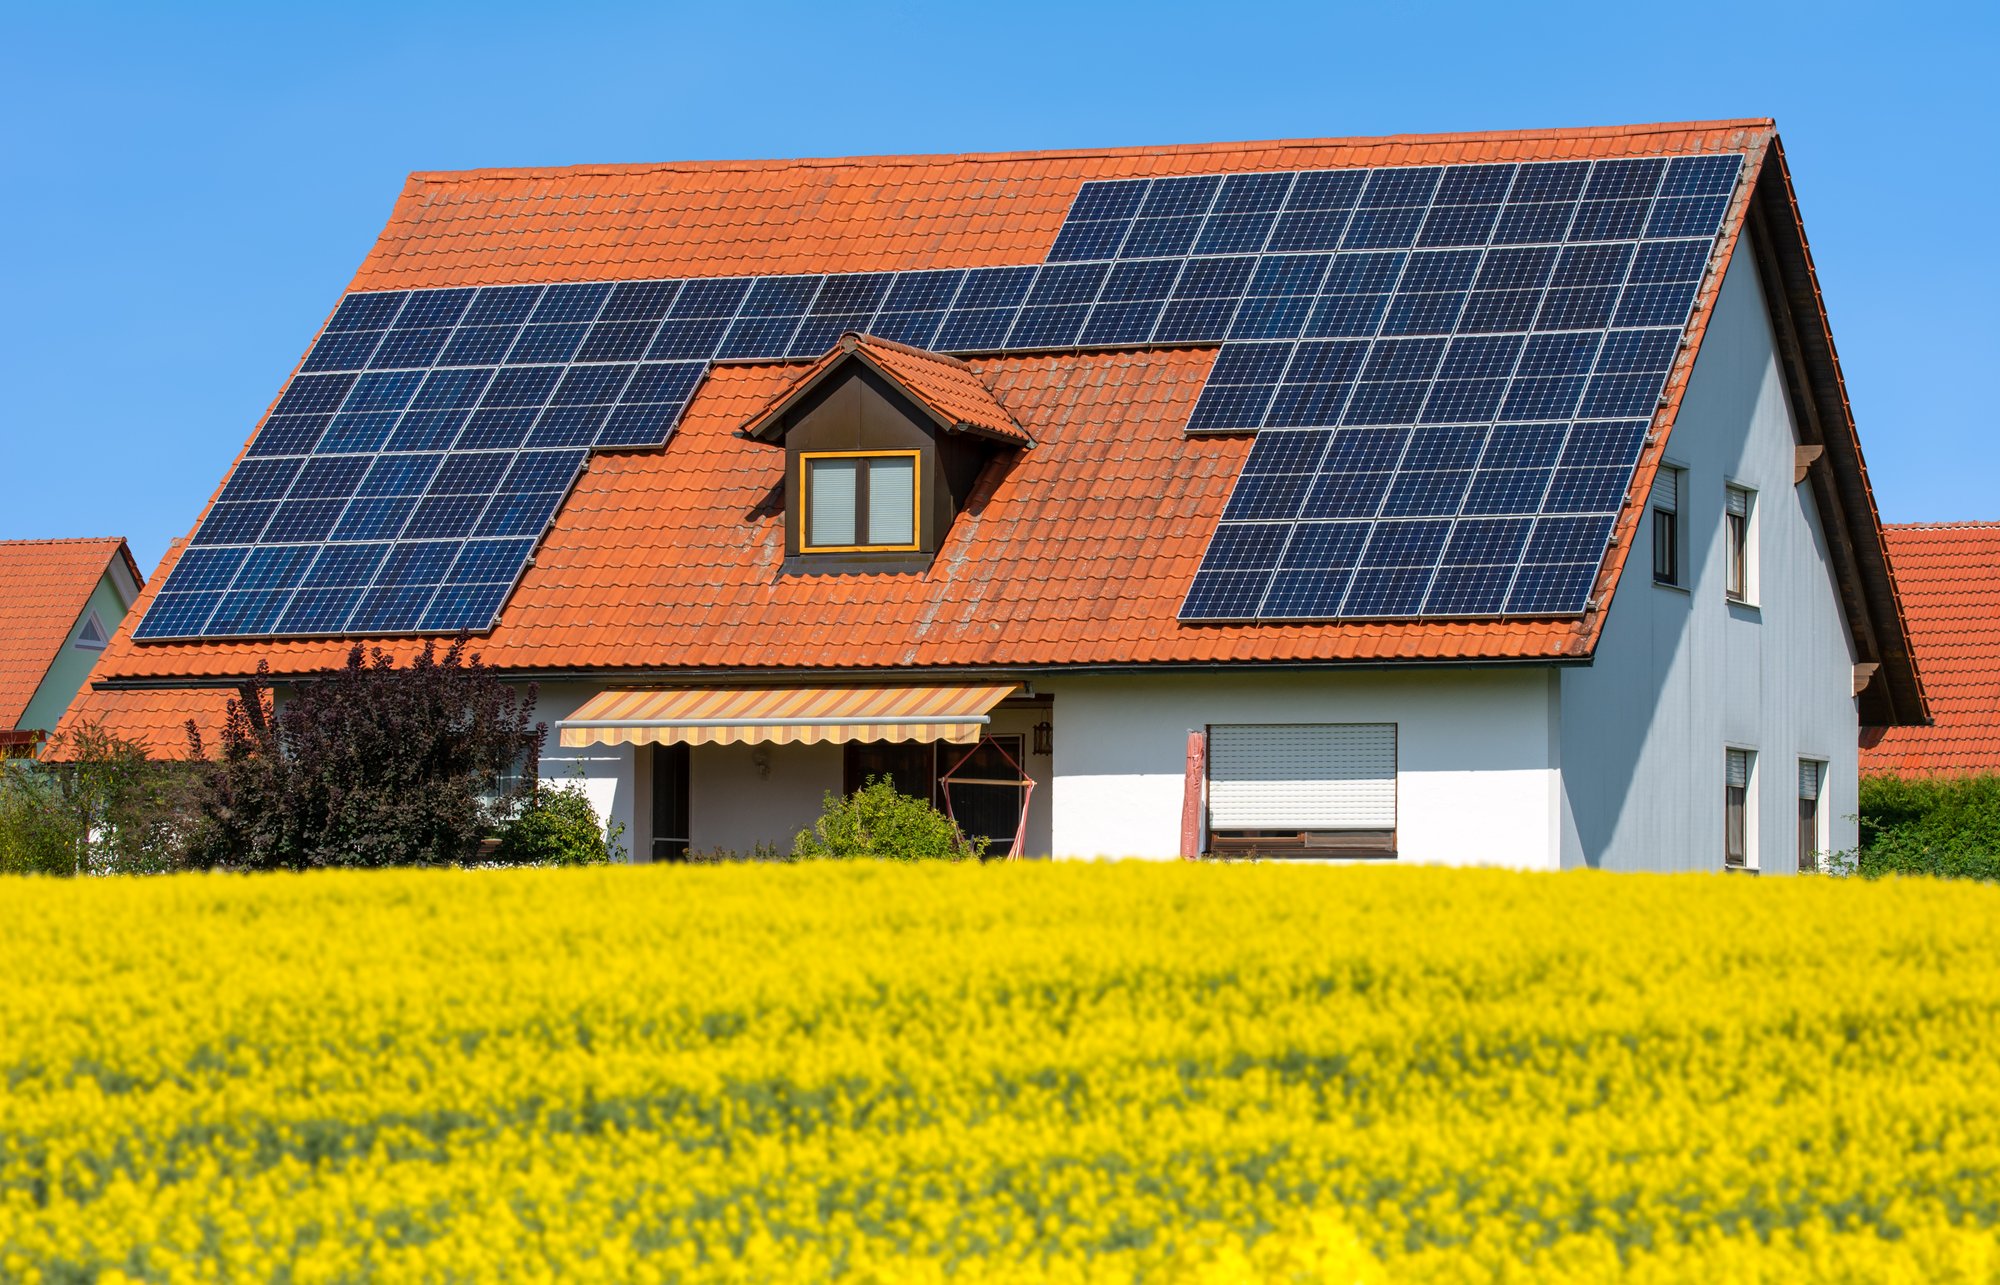 modern-house-with-photovoltaic-system-2023-11-27-05-19-22-utc